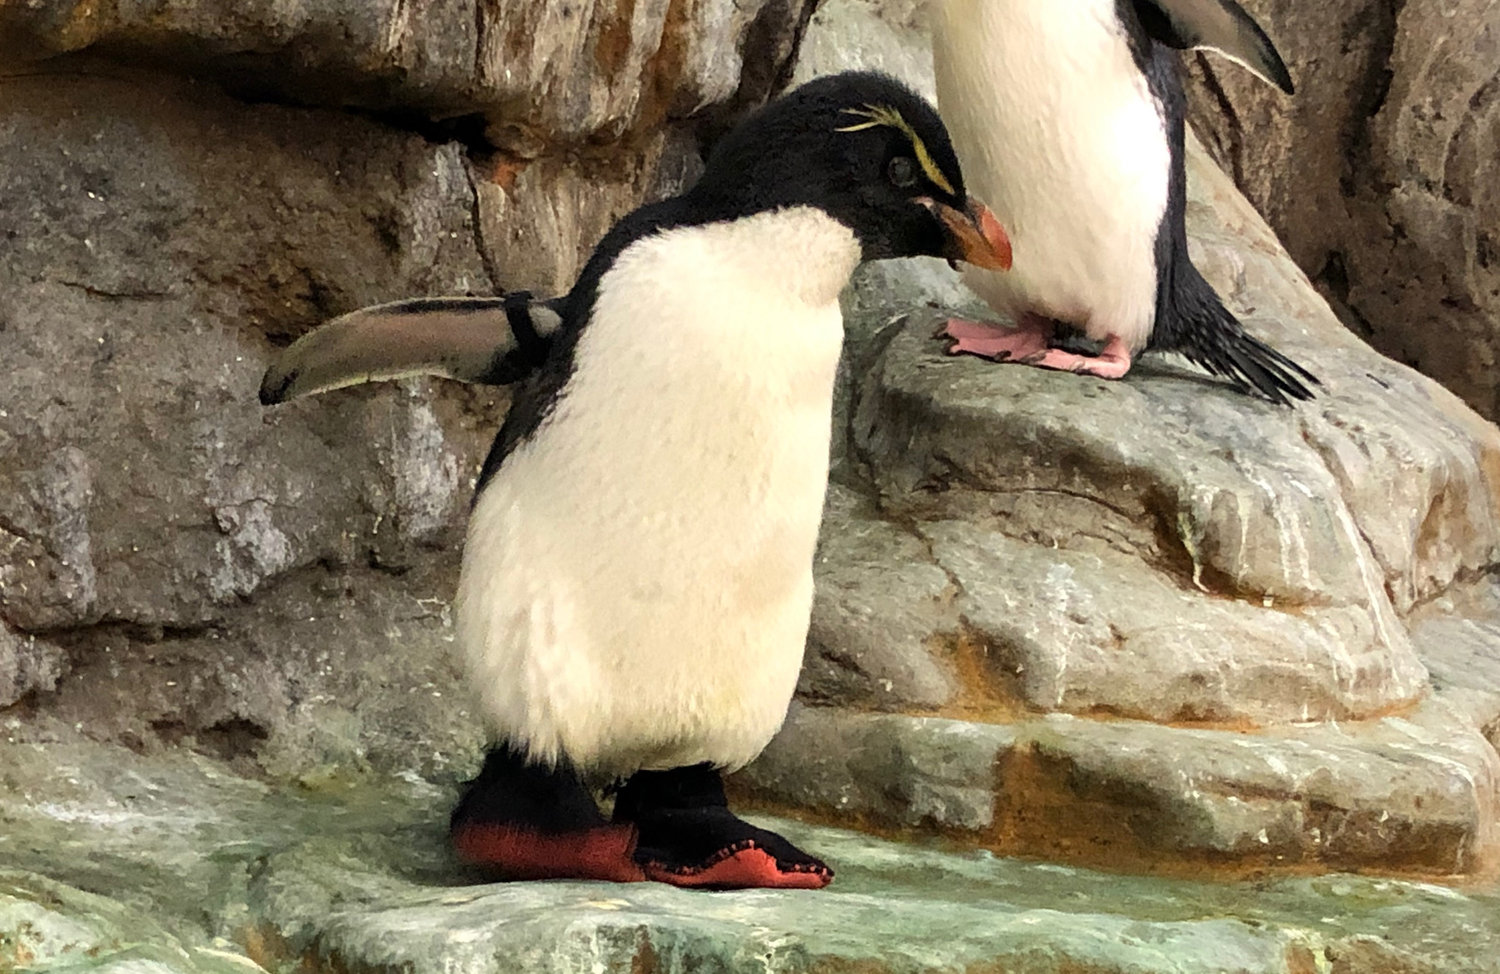 Enrique, a rockhopper penguin at the St. Louis Zoo, died Wednesday, Dec. 8, 2021, zoo officials announced. Enrique started having arthritis issues in his feet last year. Keepers had a pair of cushioned, rubber boots made for him, which have helped the problem. (Courtesy St. Louis Zoo/TNS)